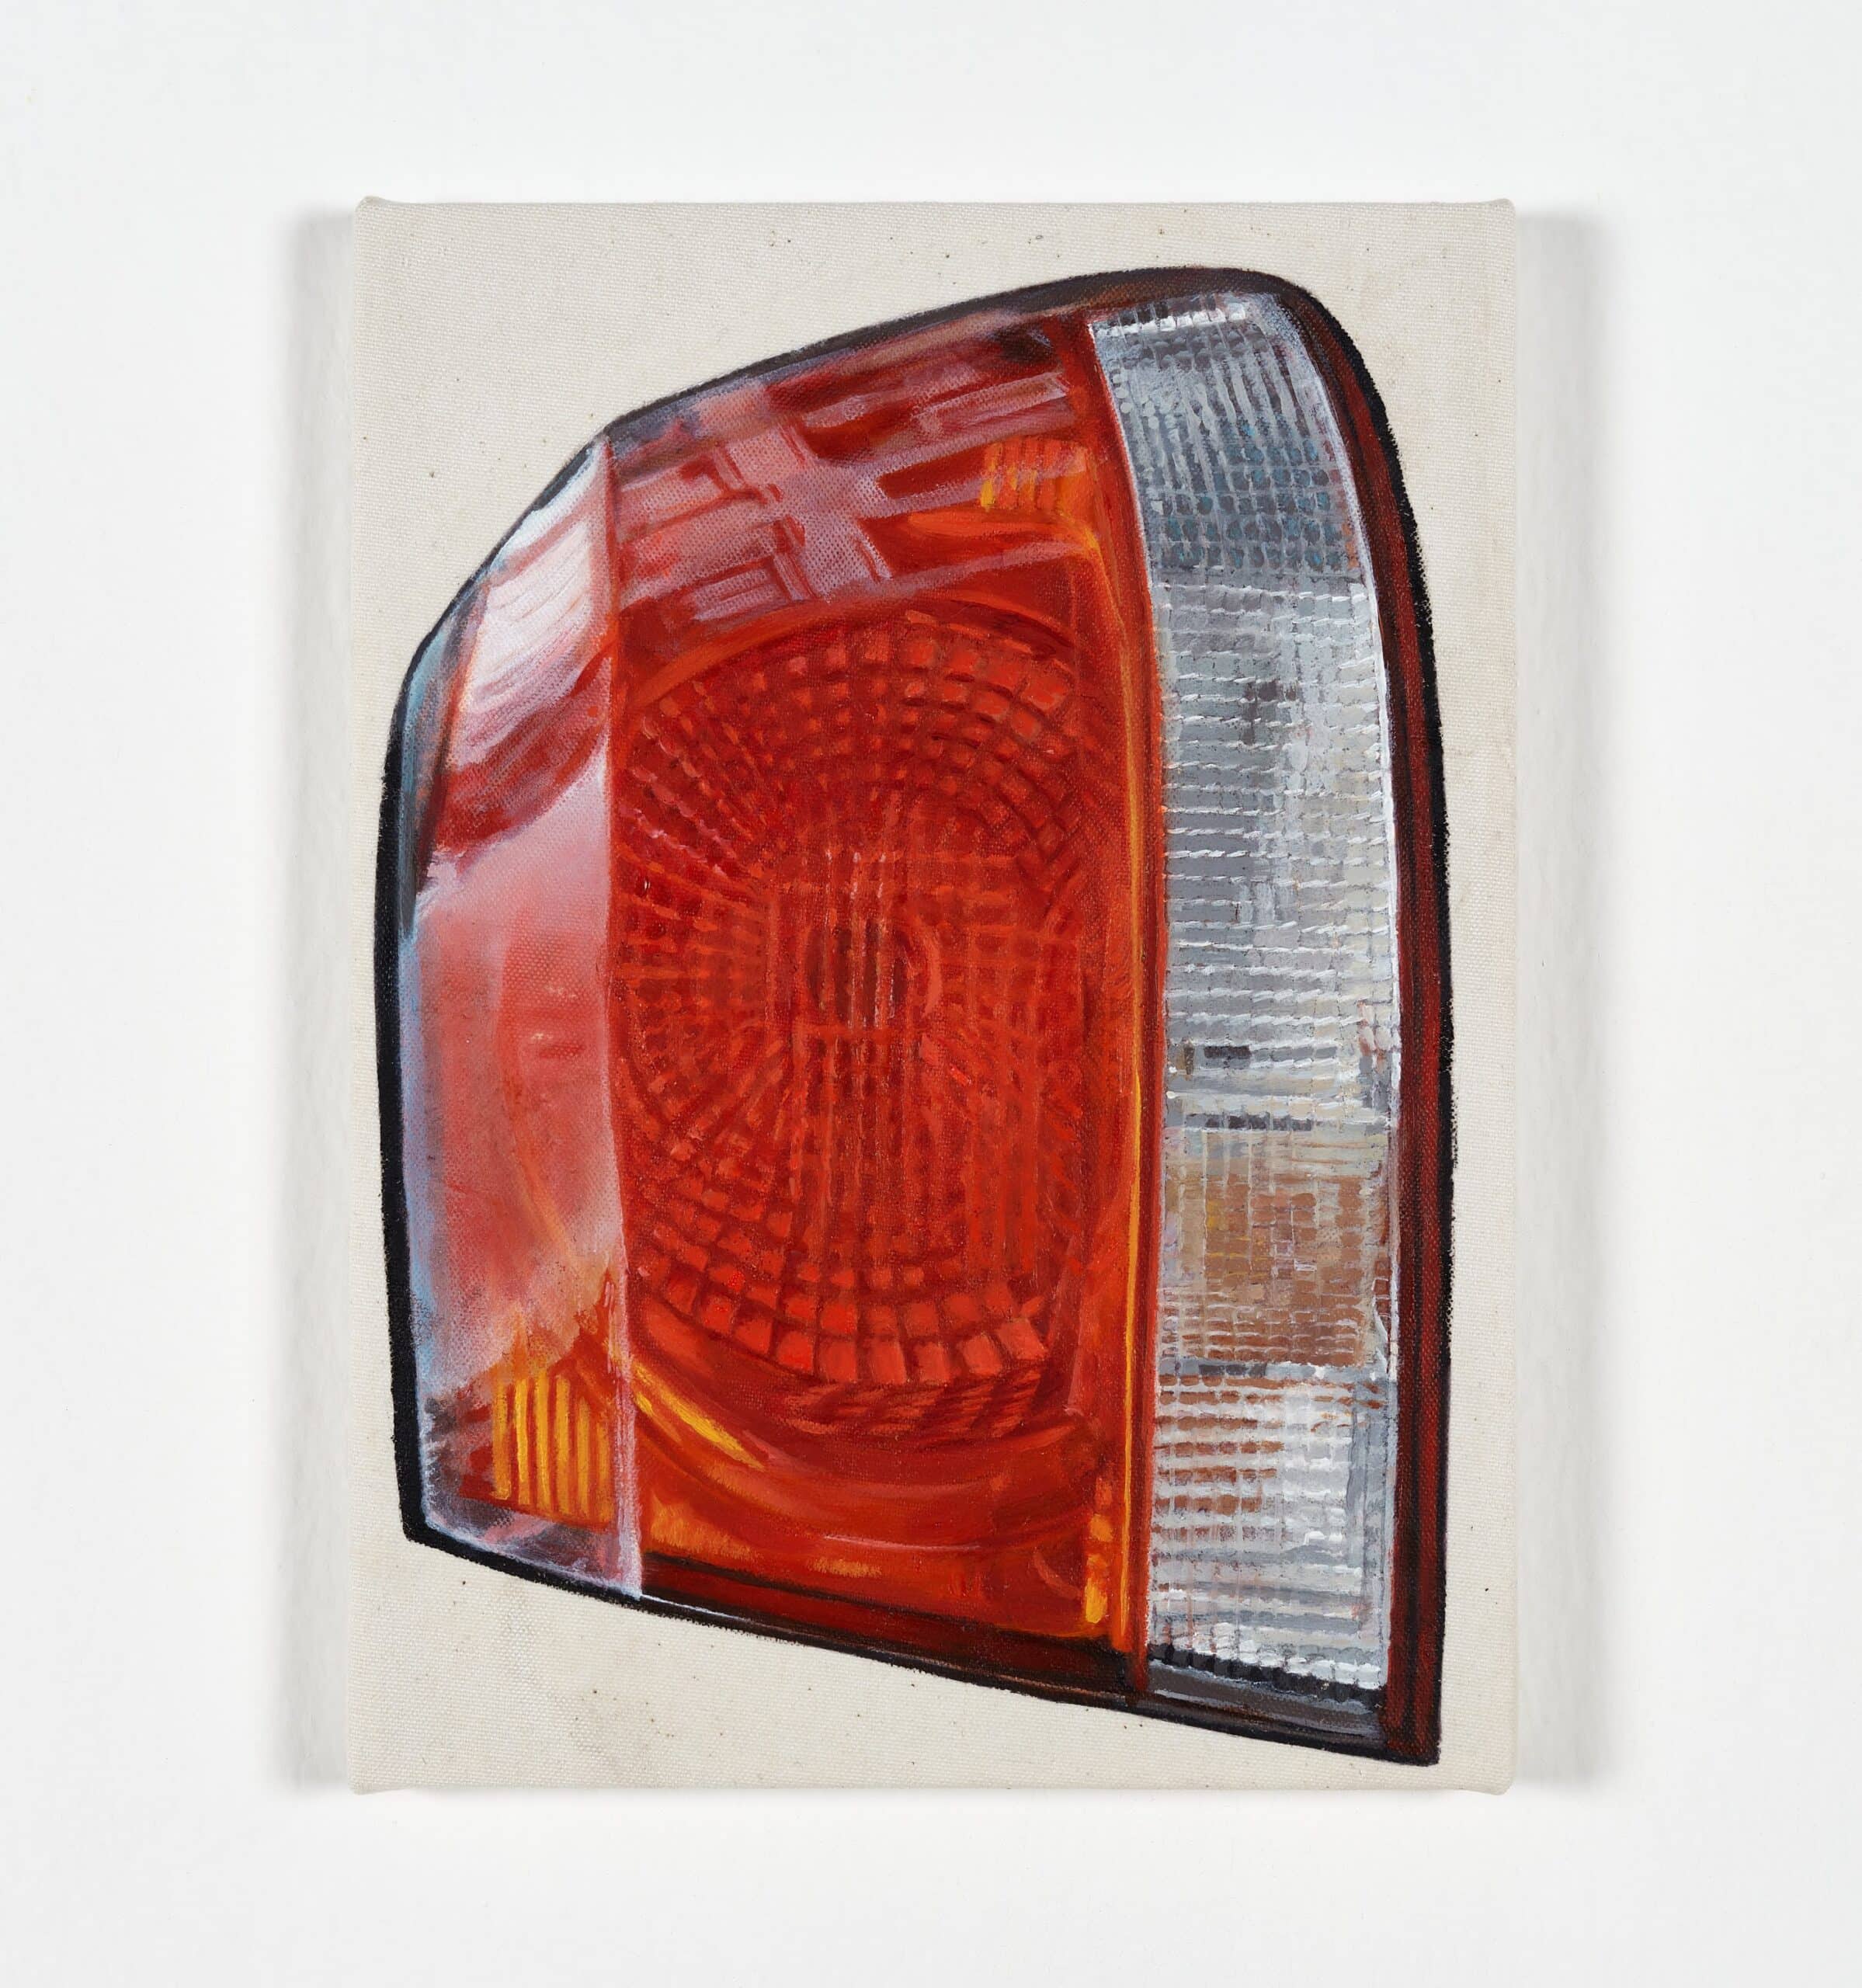 Realistic painting of a car light. Painted by Helene Appel, photographed by Carlo Favore